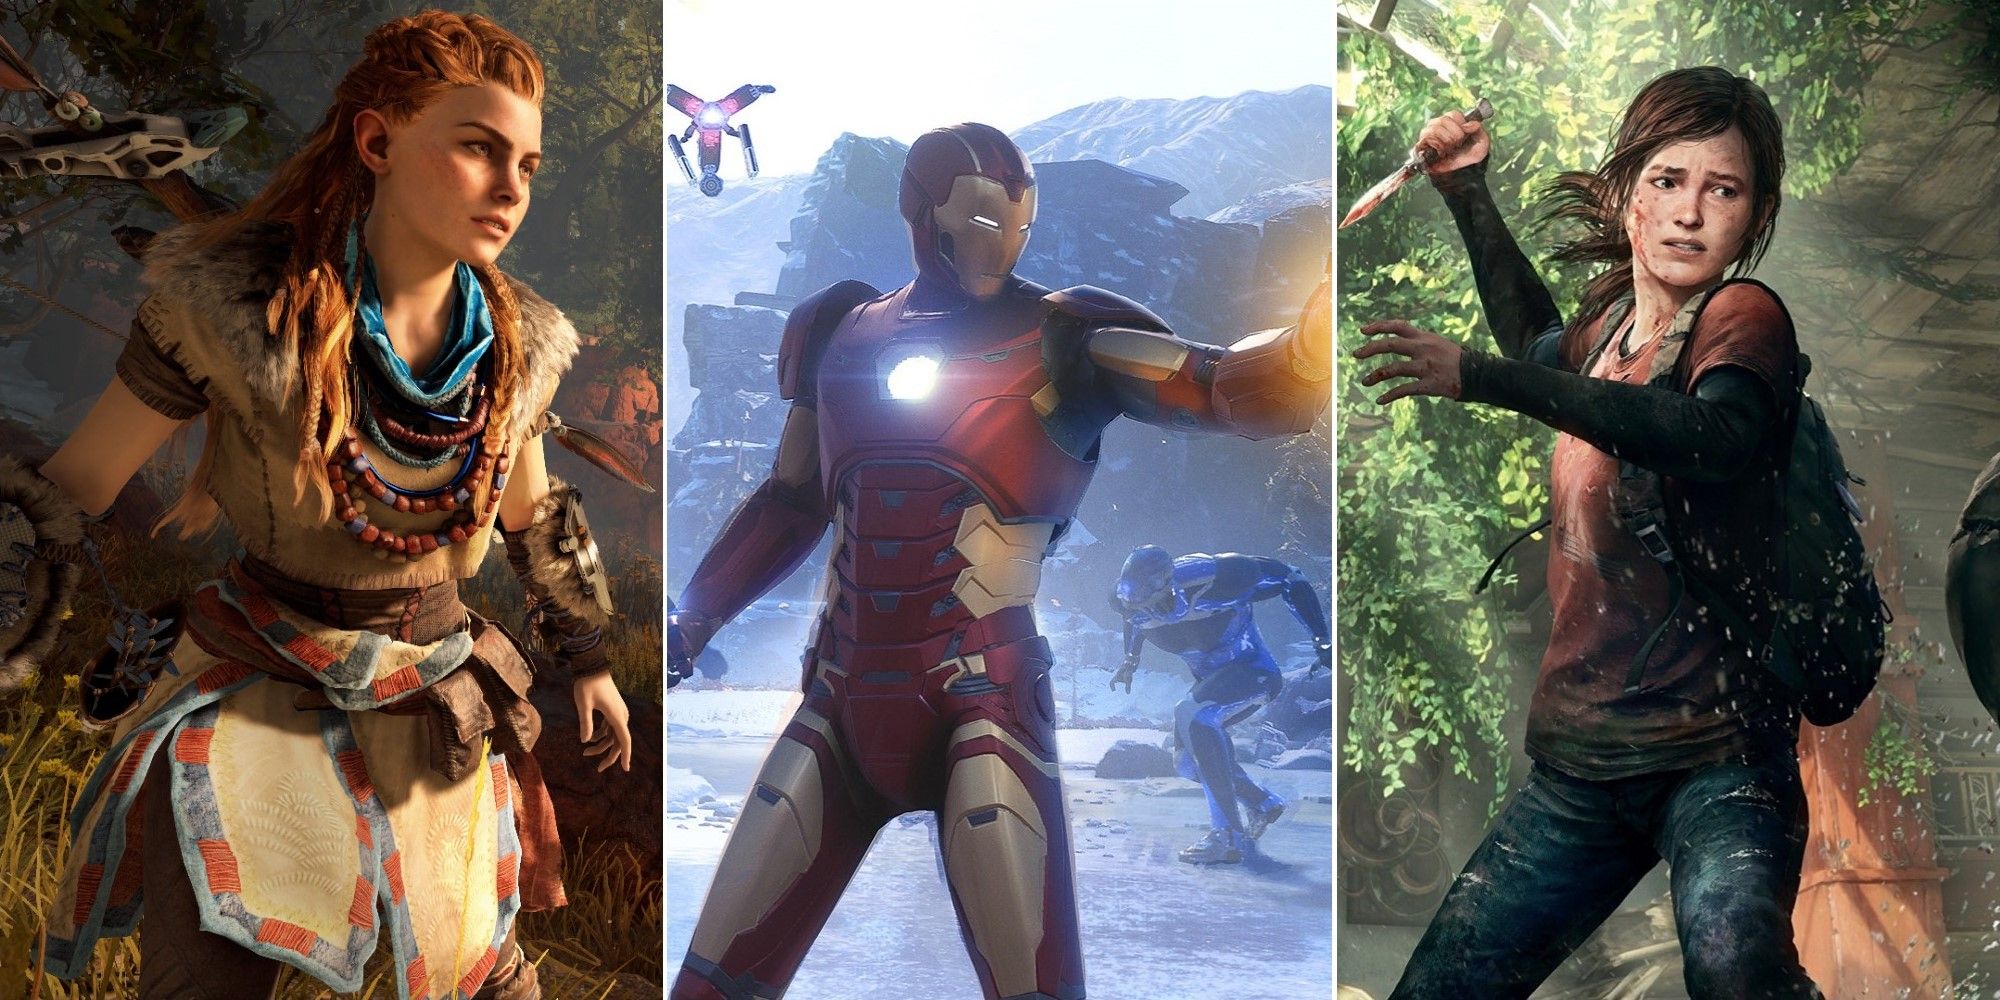 Left to right: Horizon Zero Dawn, Marvel's Avengers, and The Last Of Us